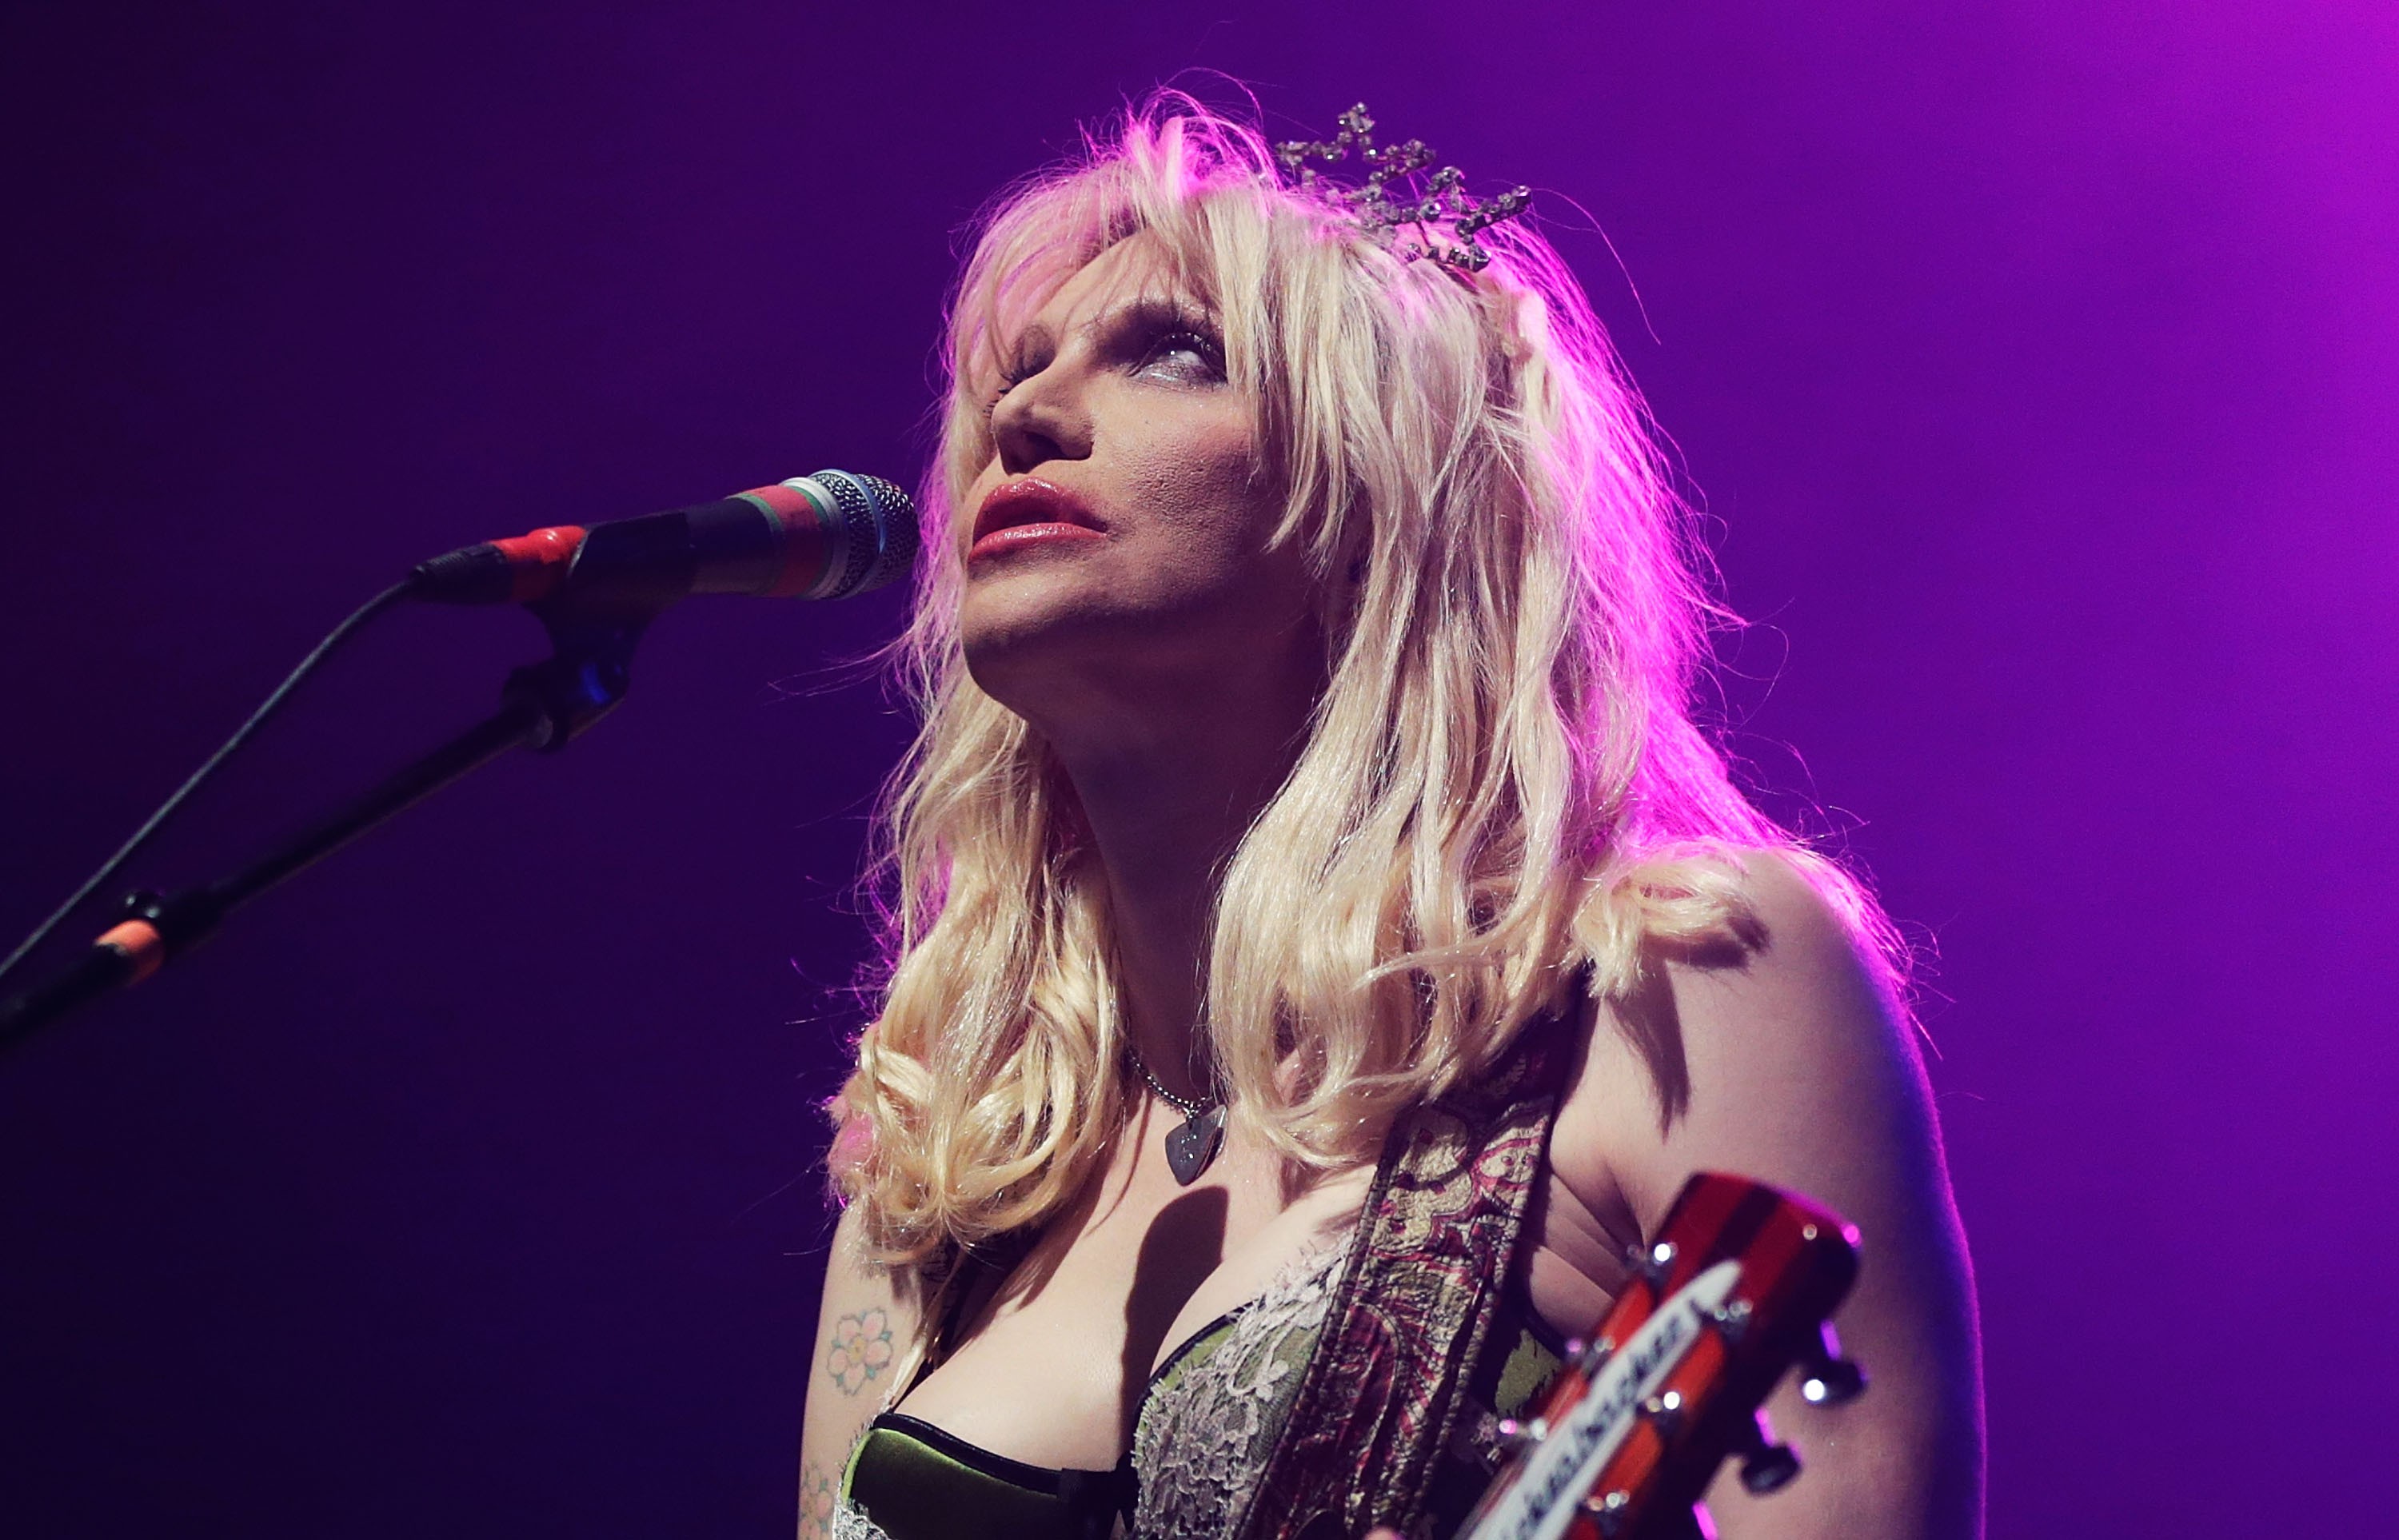 Courtney Love Performs Live In Sydney